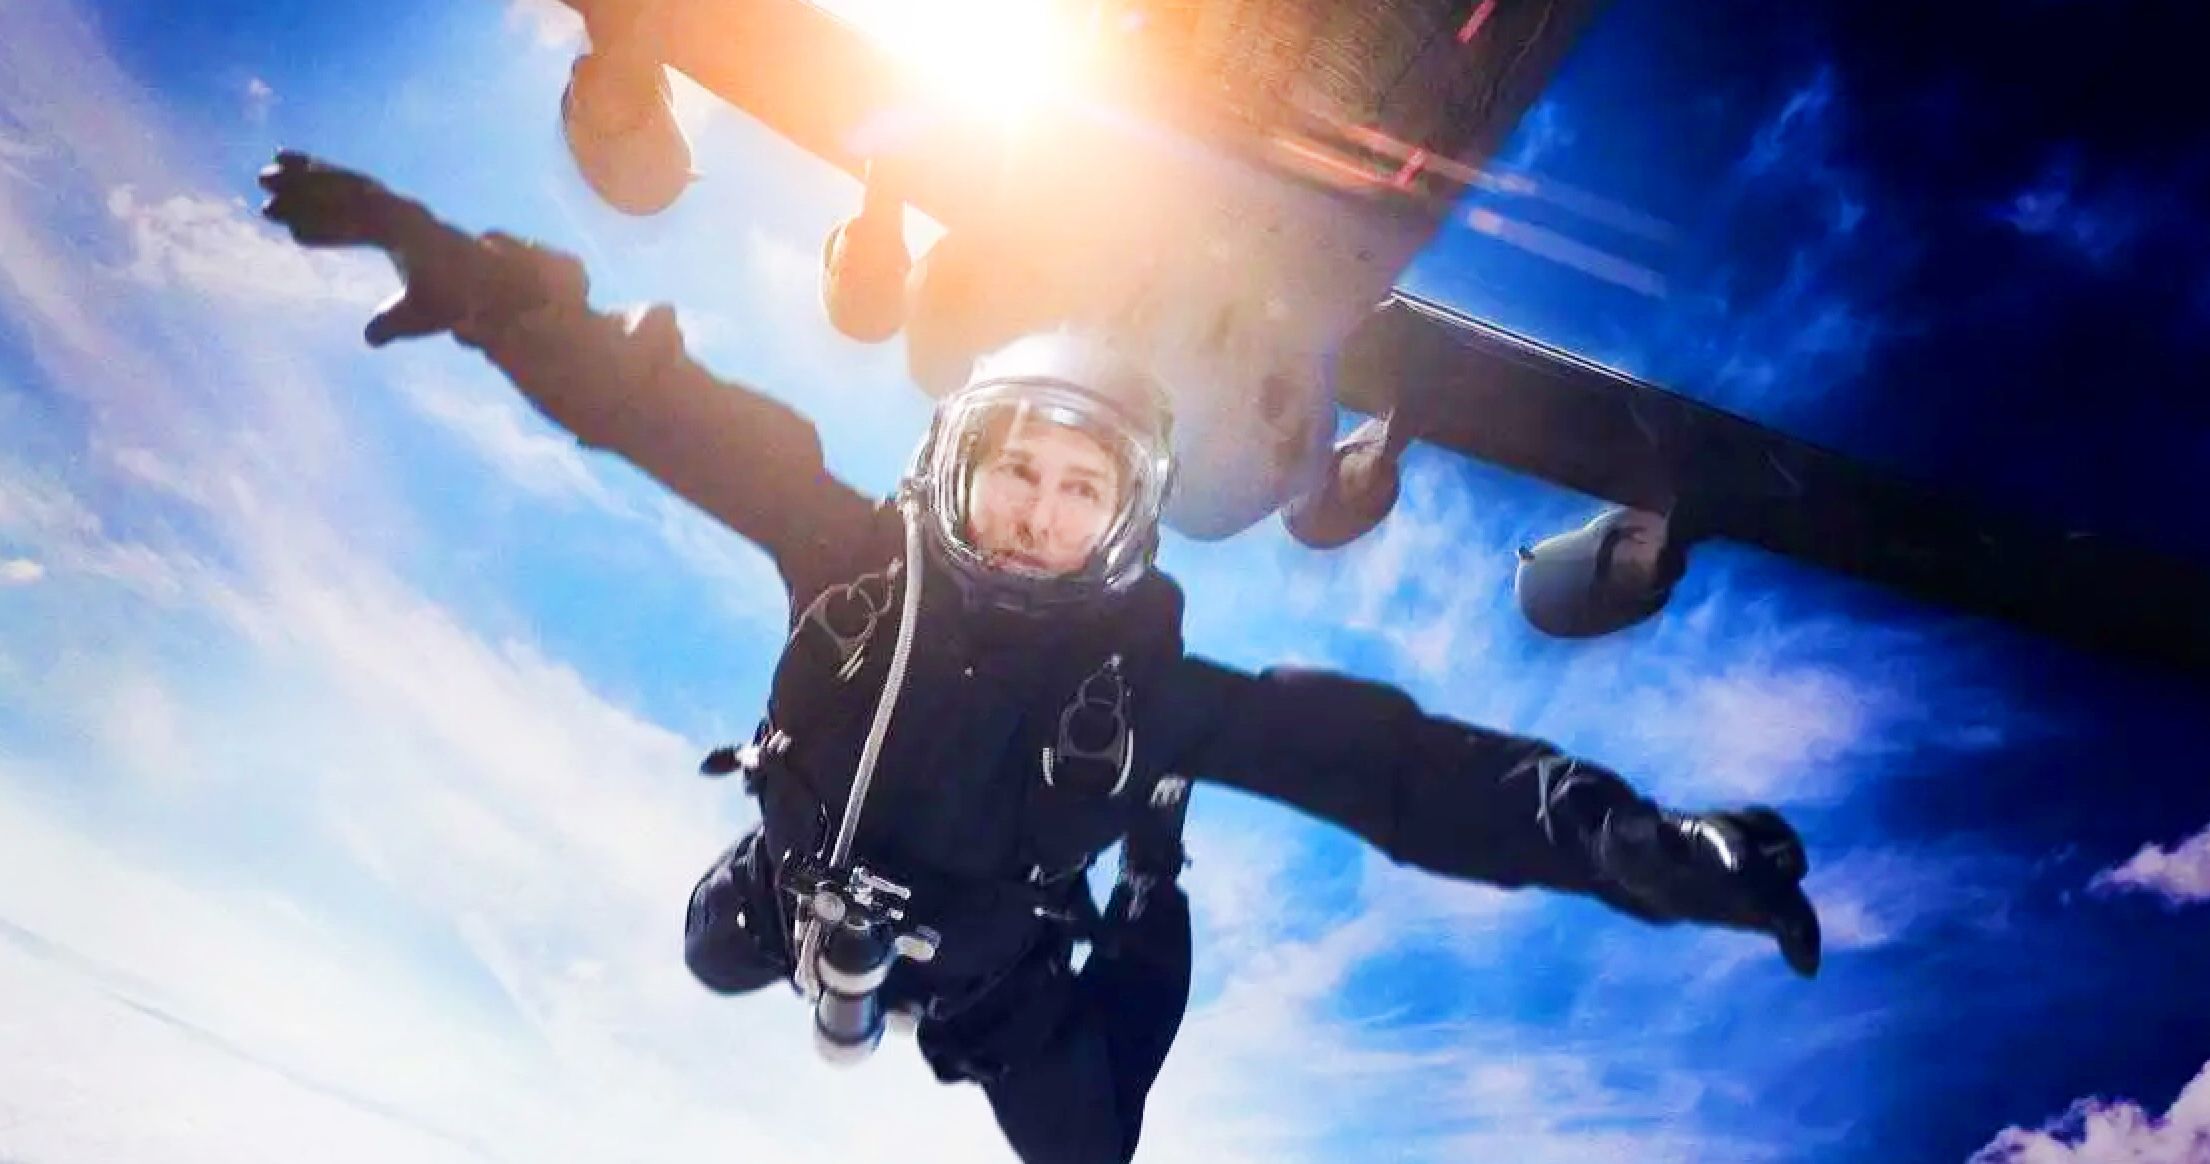 Tom Cruise's Year-Long Mission: Impossible 7 Training Included 500 Skydives &amp; 13,000 Motorbike Jumps